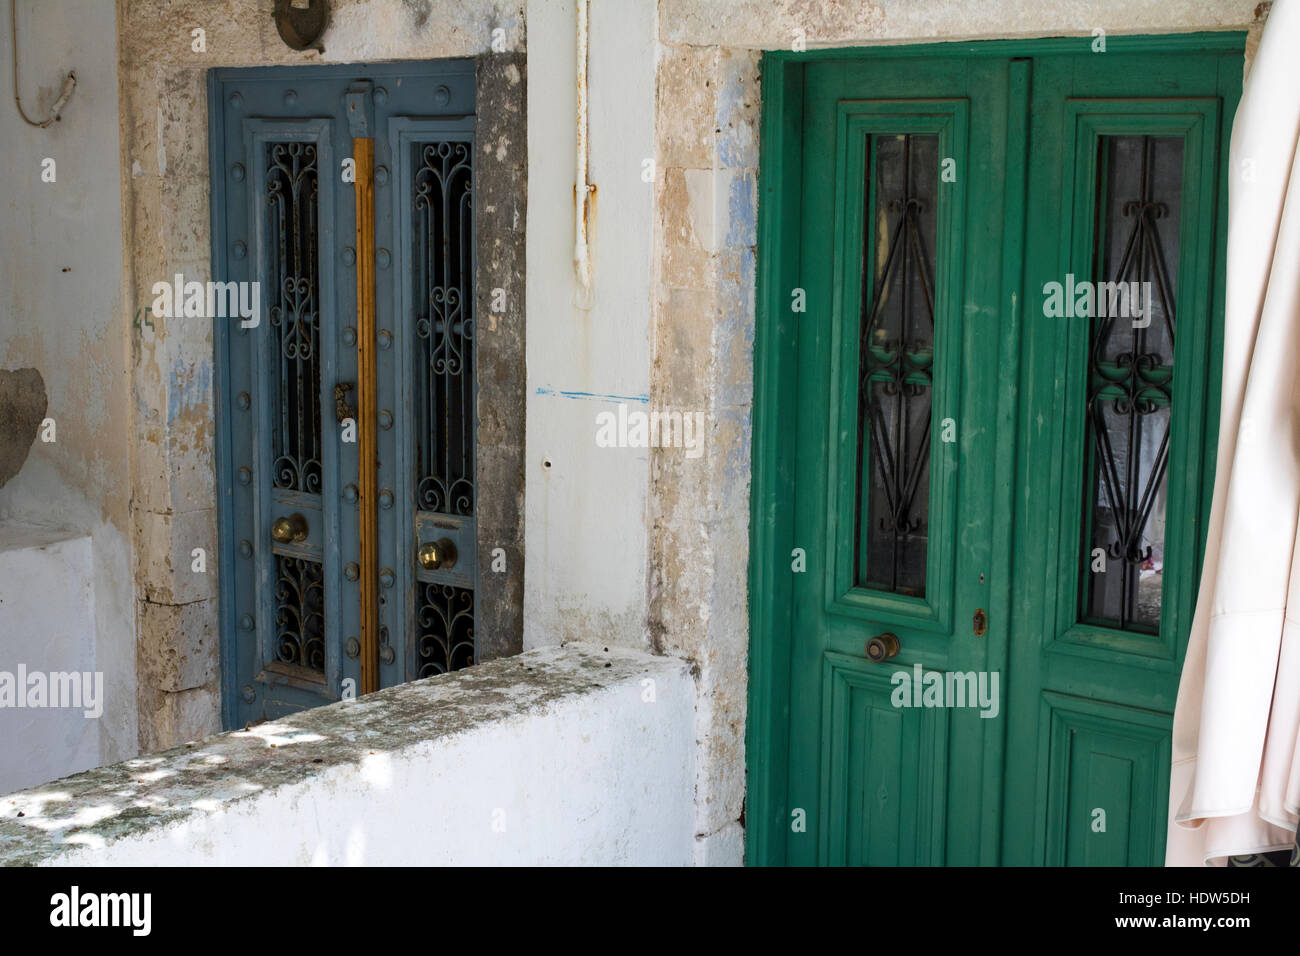 Detailed View, Two Wooden Doors with ornate Metal Grills on the Windows, Fiskardo, Kefalonia, Greece. Stock Photo